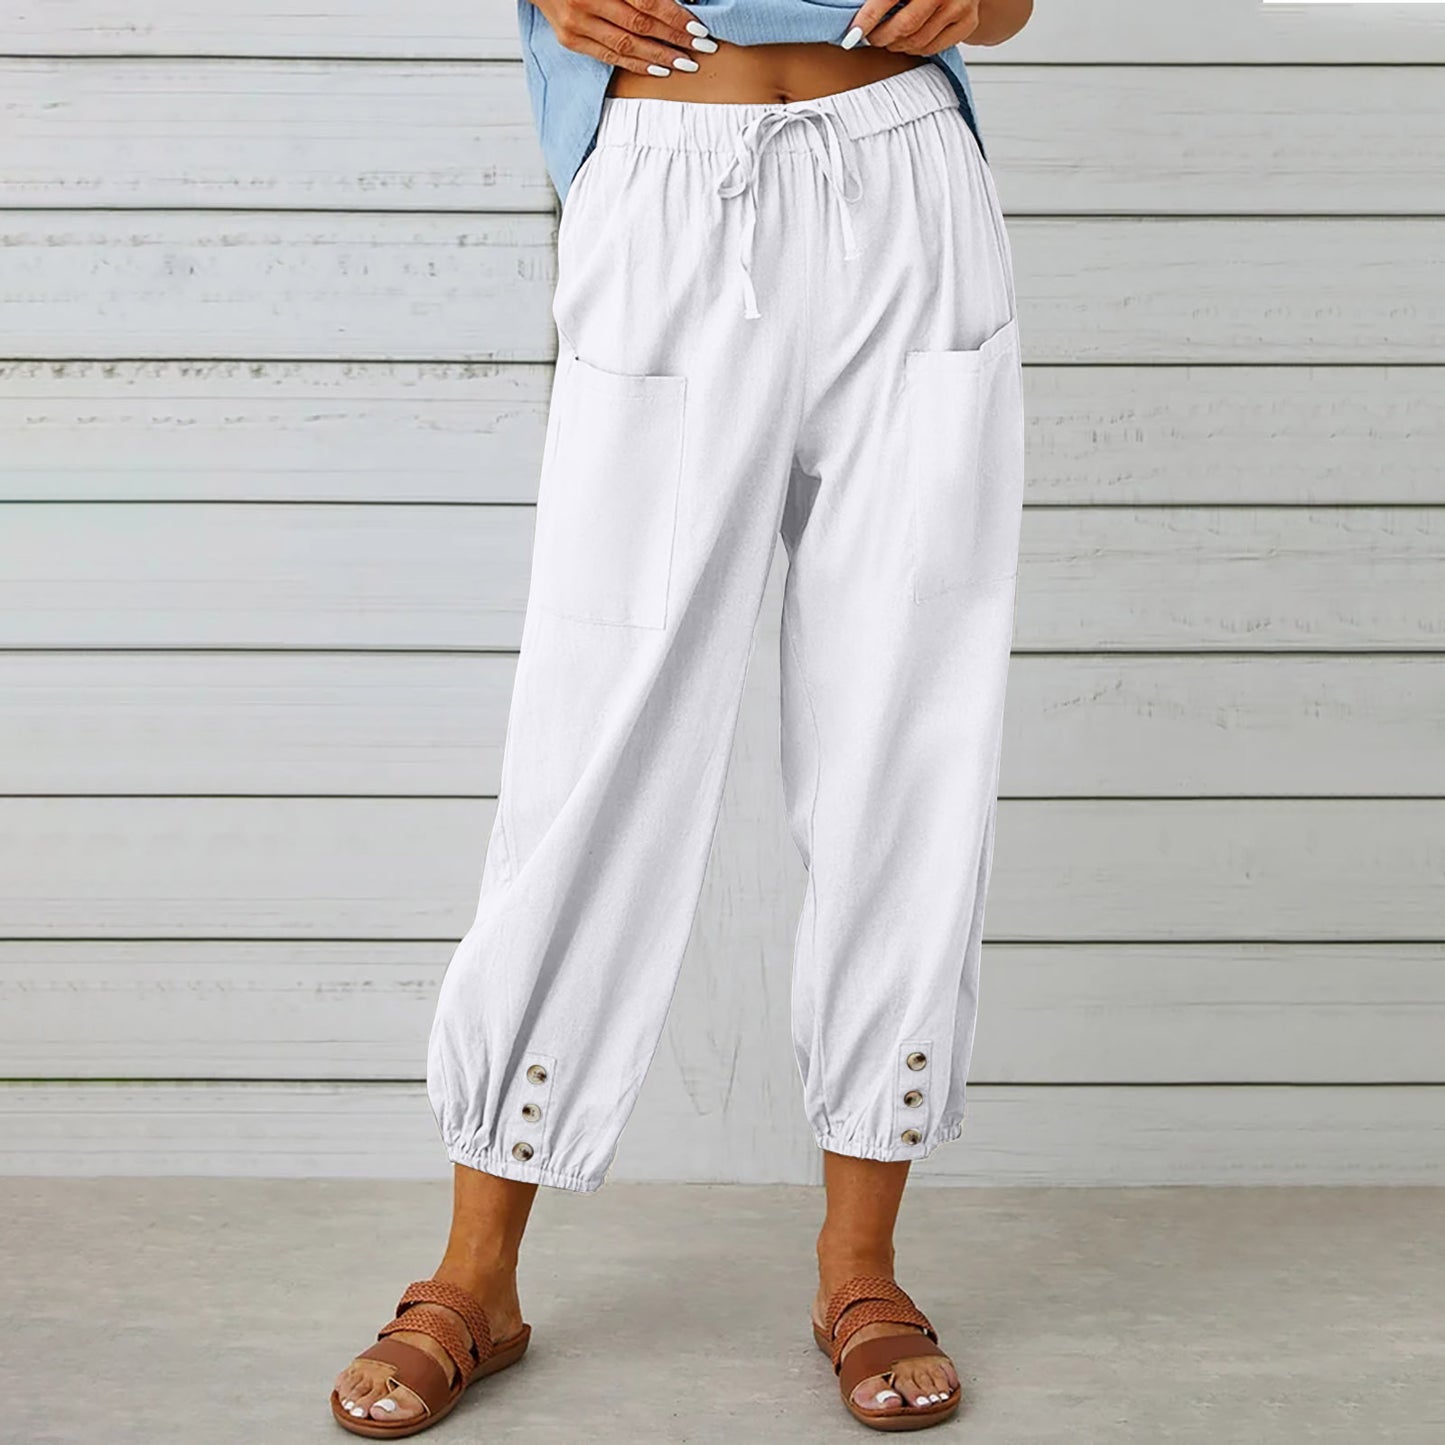 Drawstring Tie Pants for Summer